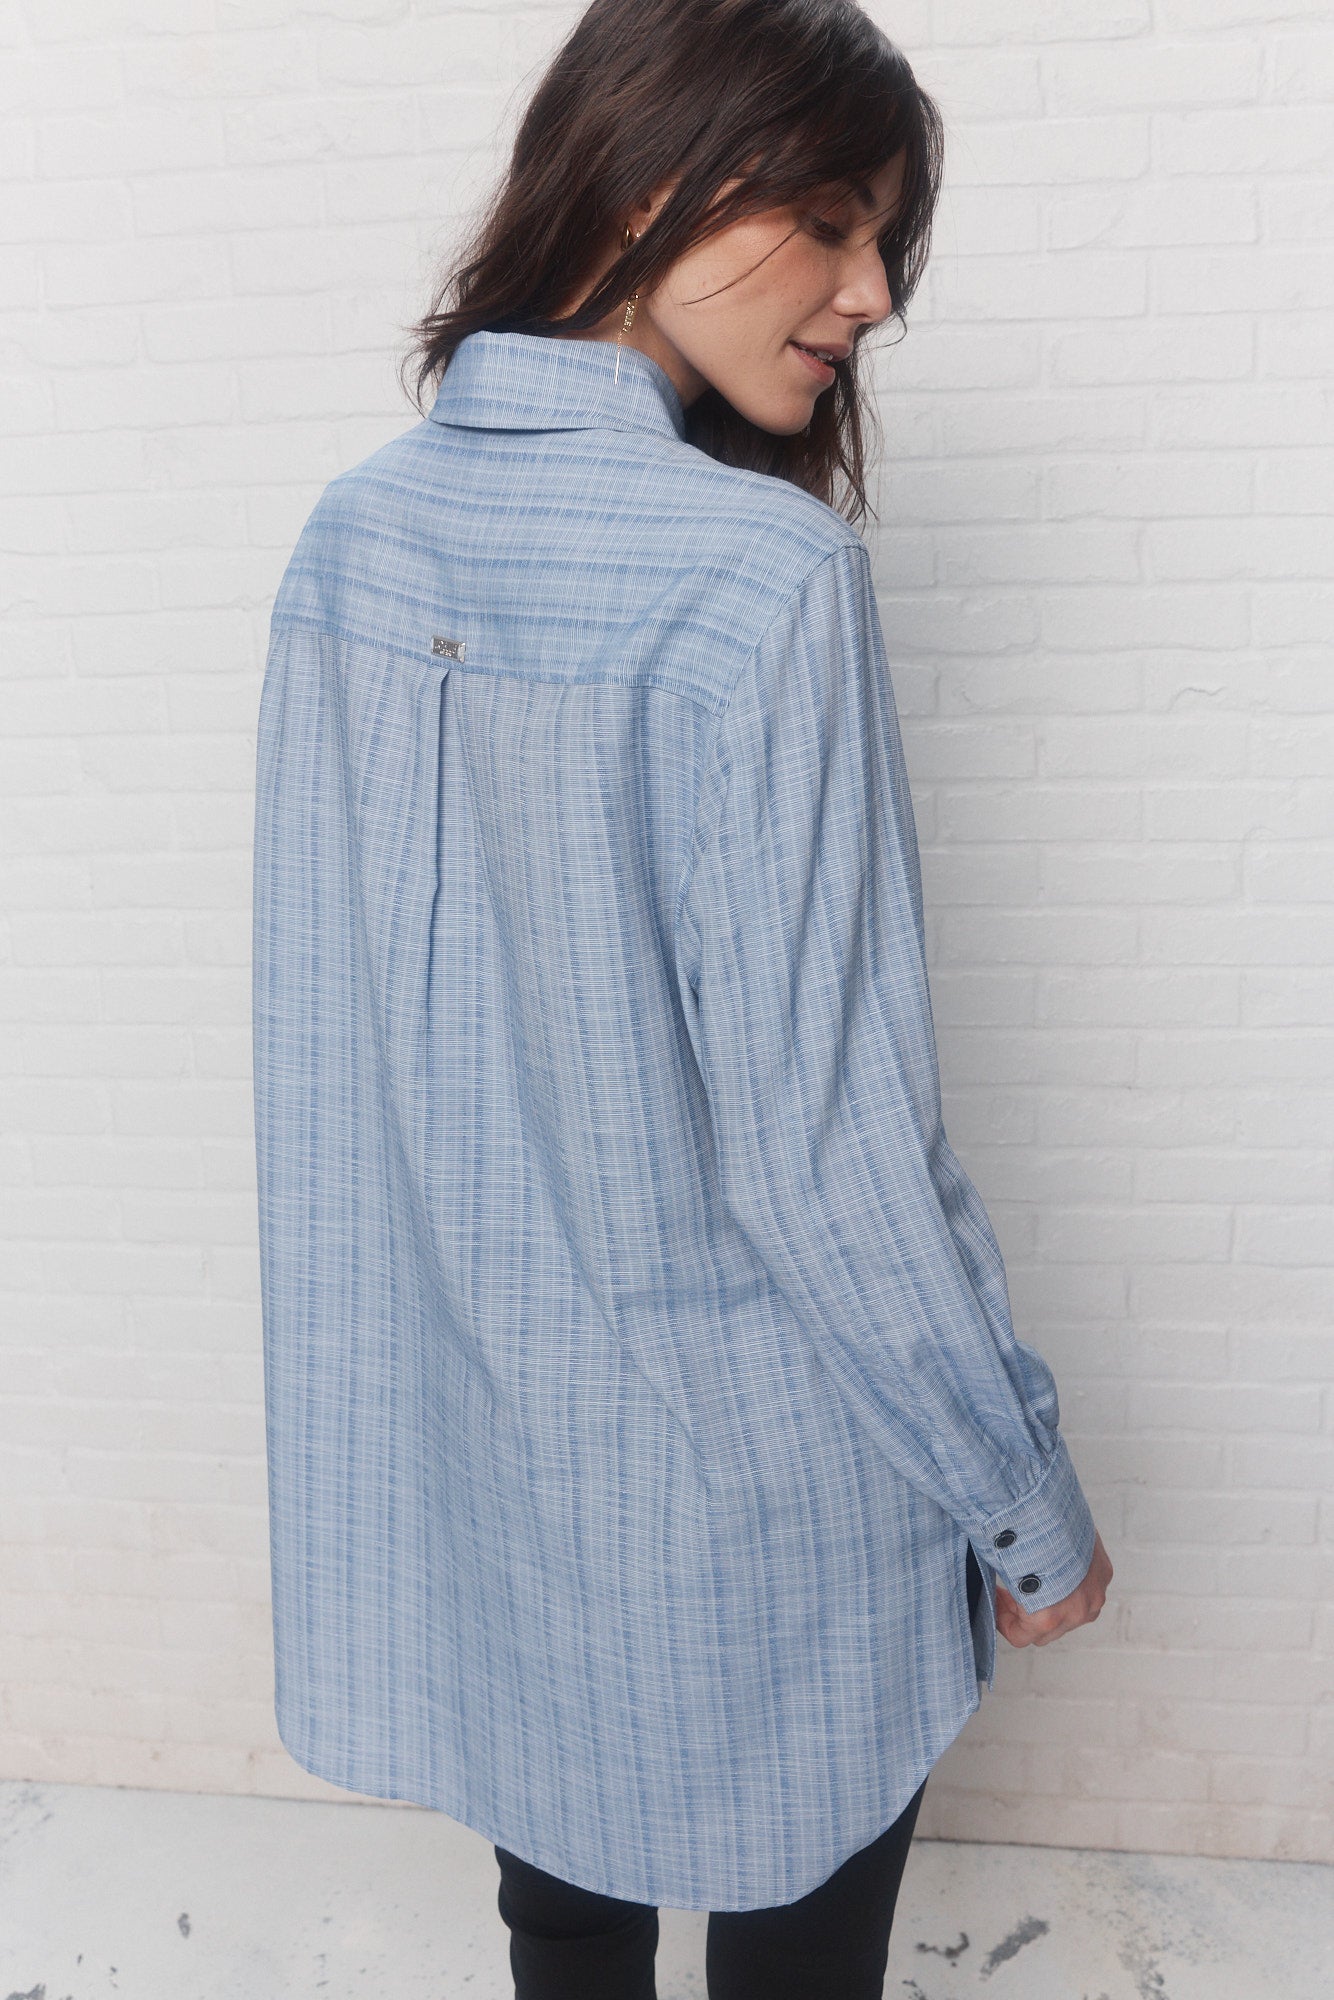 Long blue shirt with lined pattern | Douglas